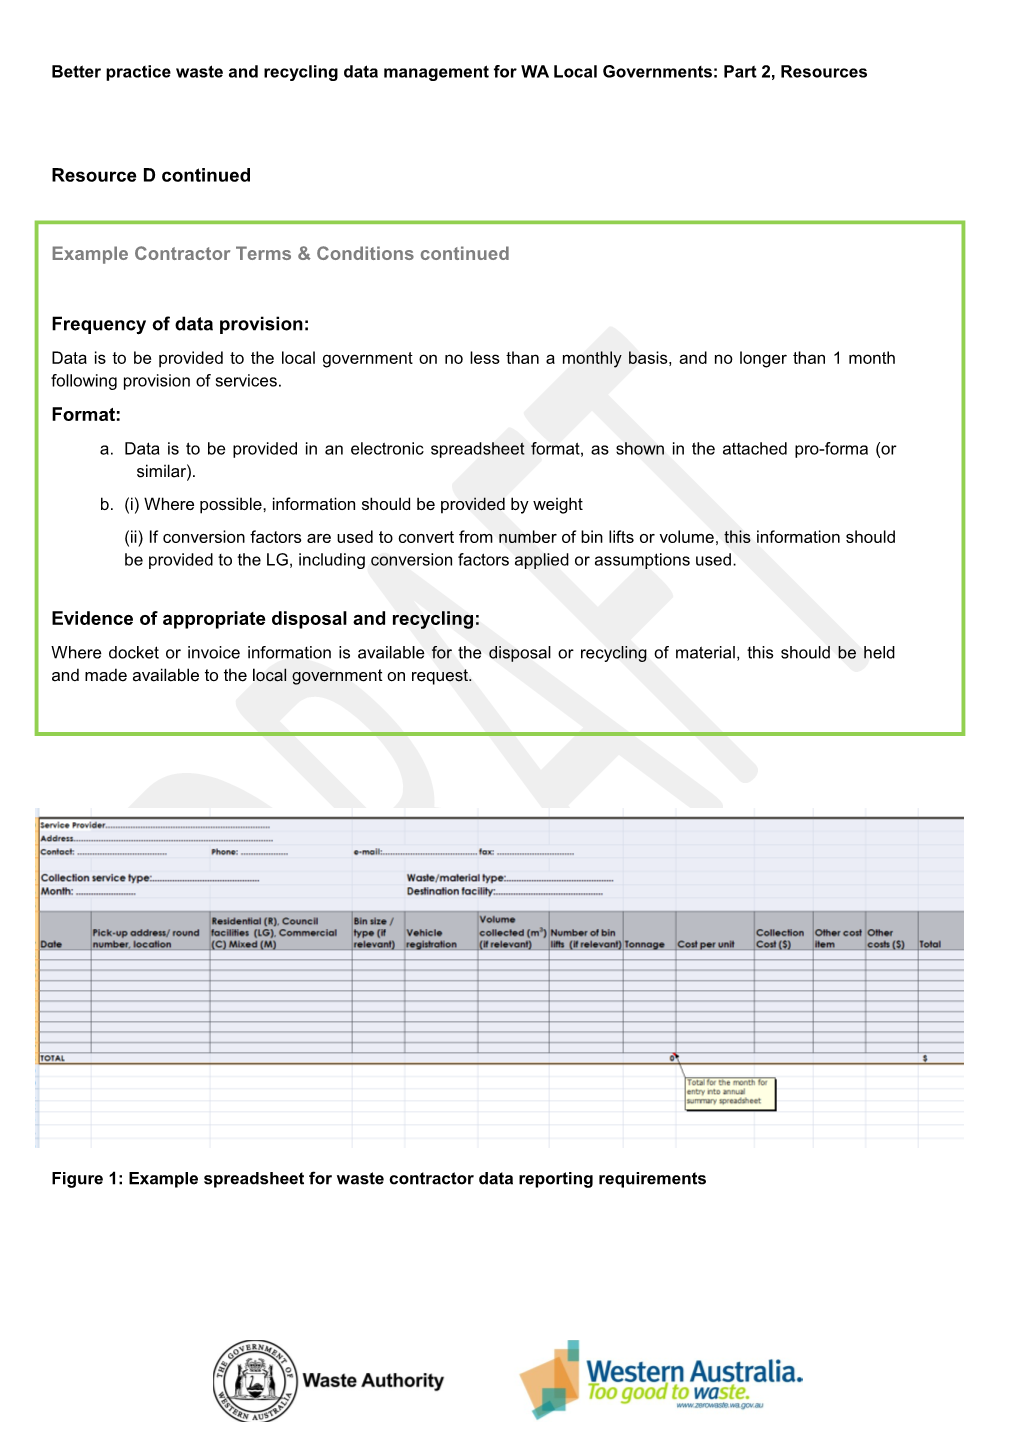 Example Contractor Terms & Conditions - Waste And/Or Recycling Data Reporting